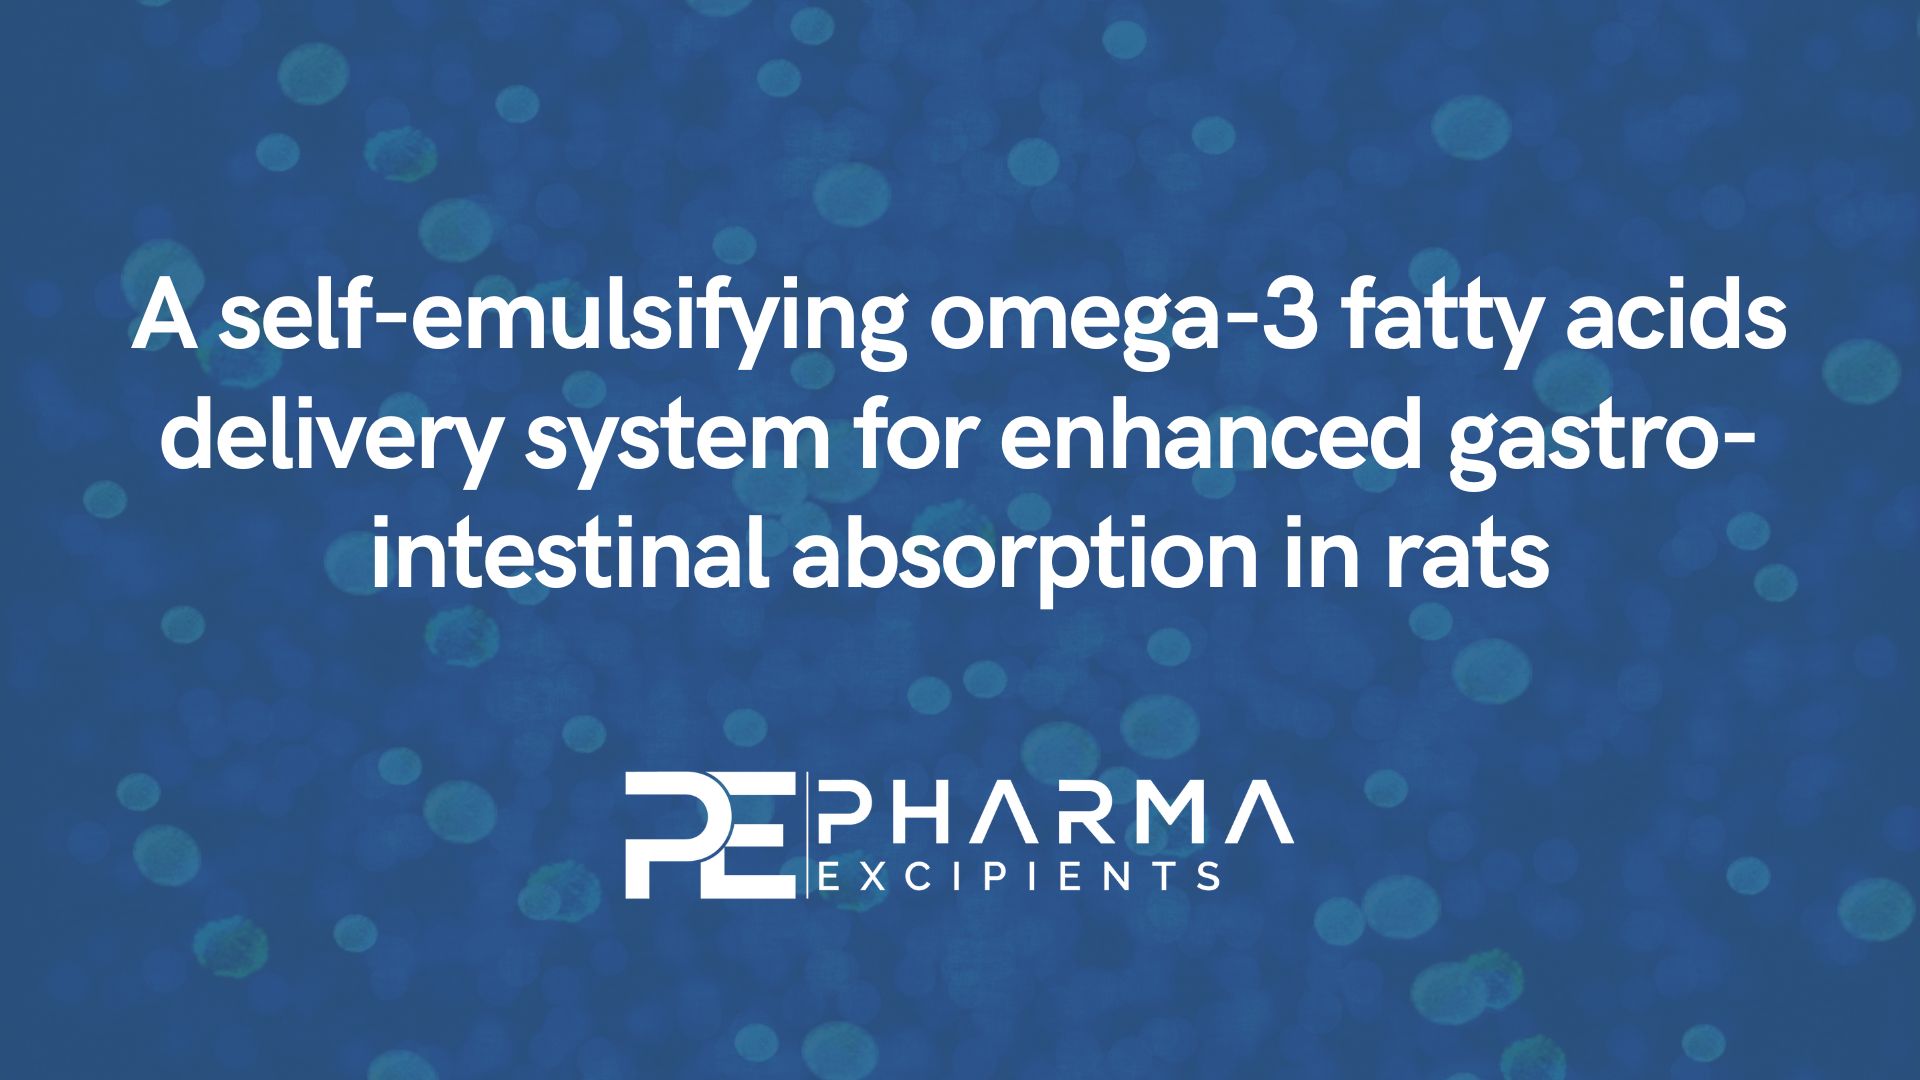 A self-emulsifying omega-3 fatty acids delivery system for enhanced gastro-intestinal absorption in rats